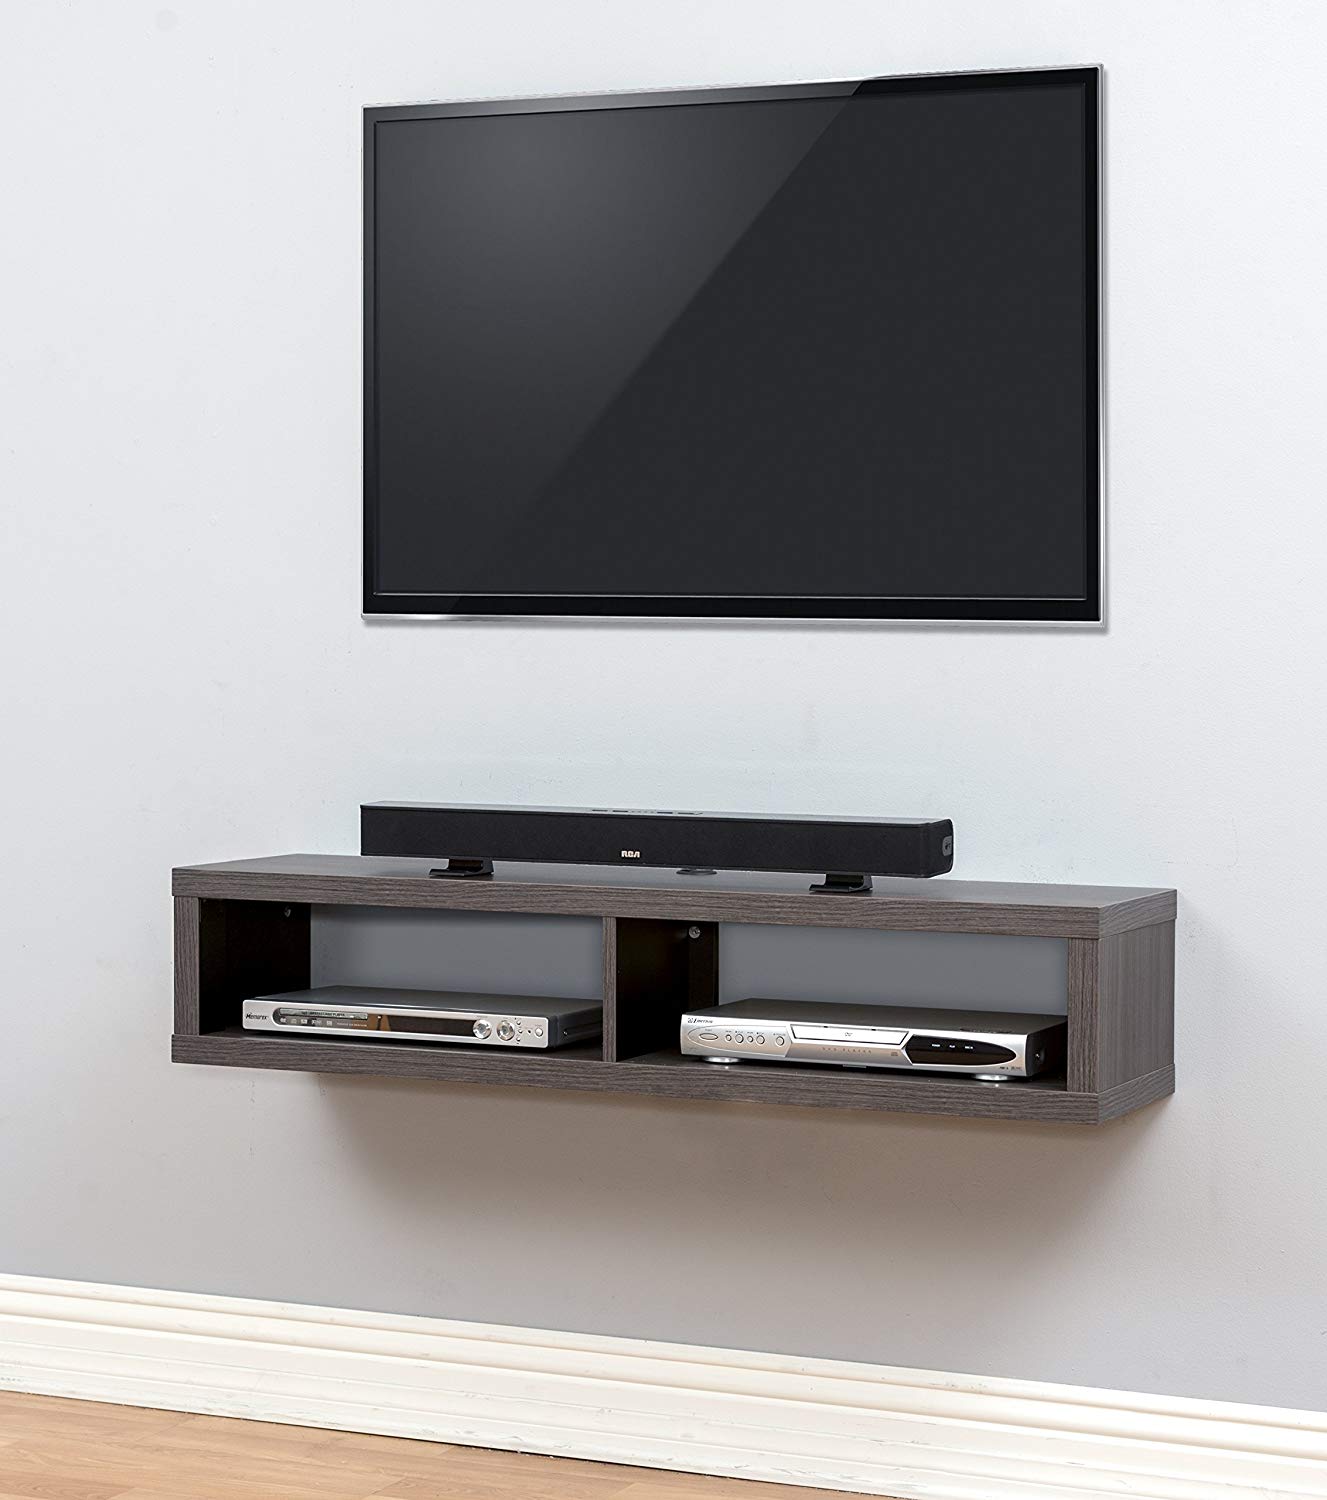 Tv Fireplace Wall Unit Designs Awesome Popular Wall Mounted Tvs Innovative Design Ideasa